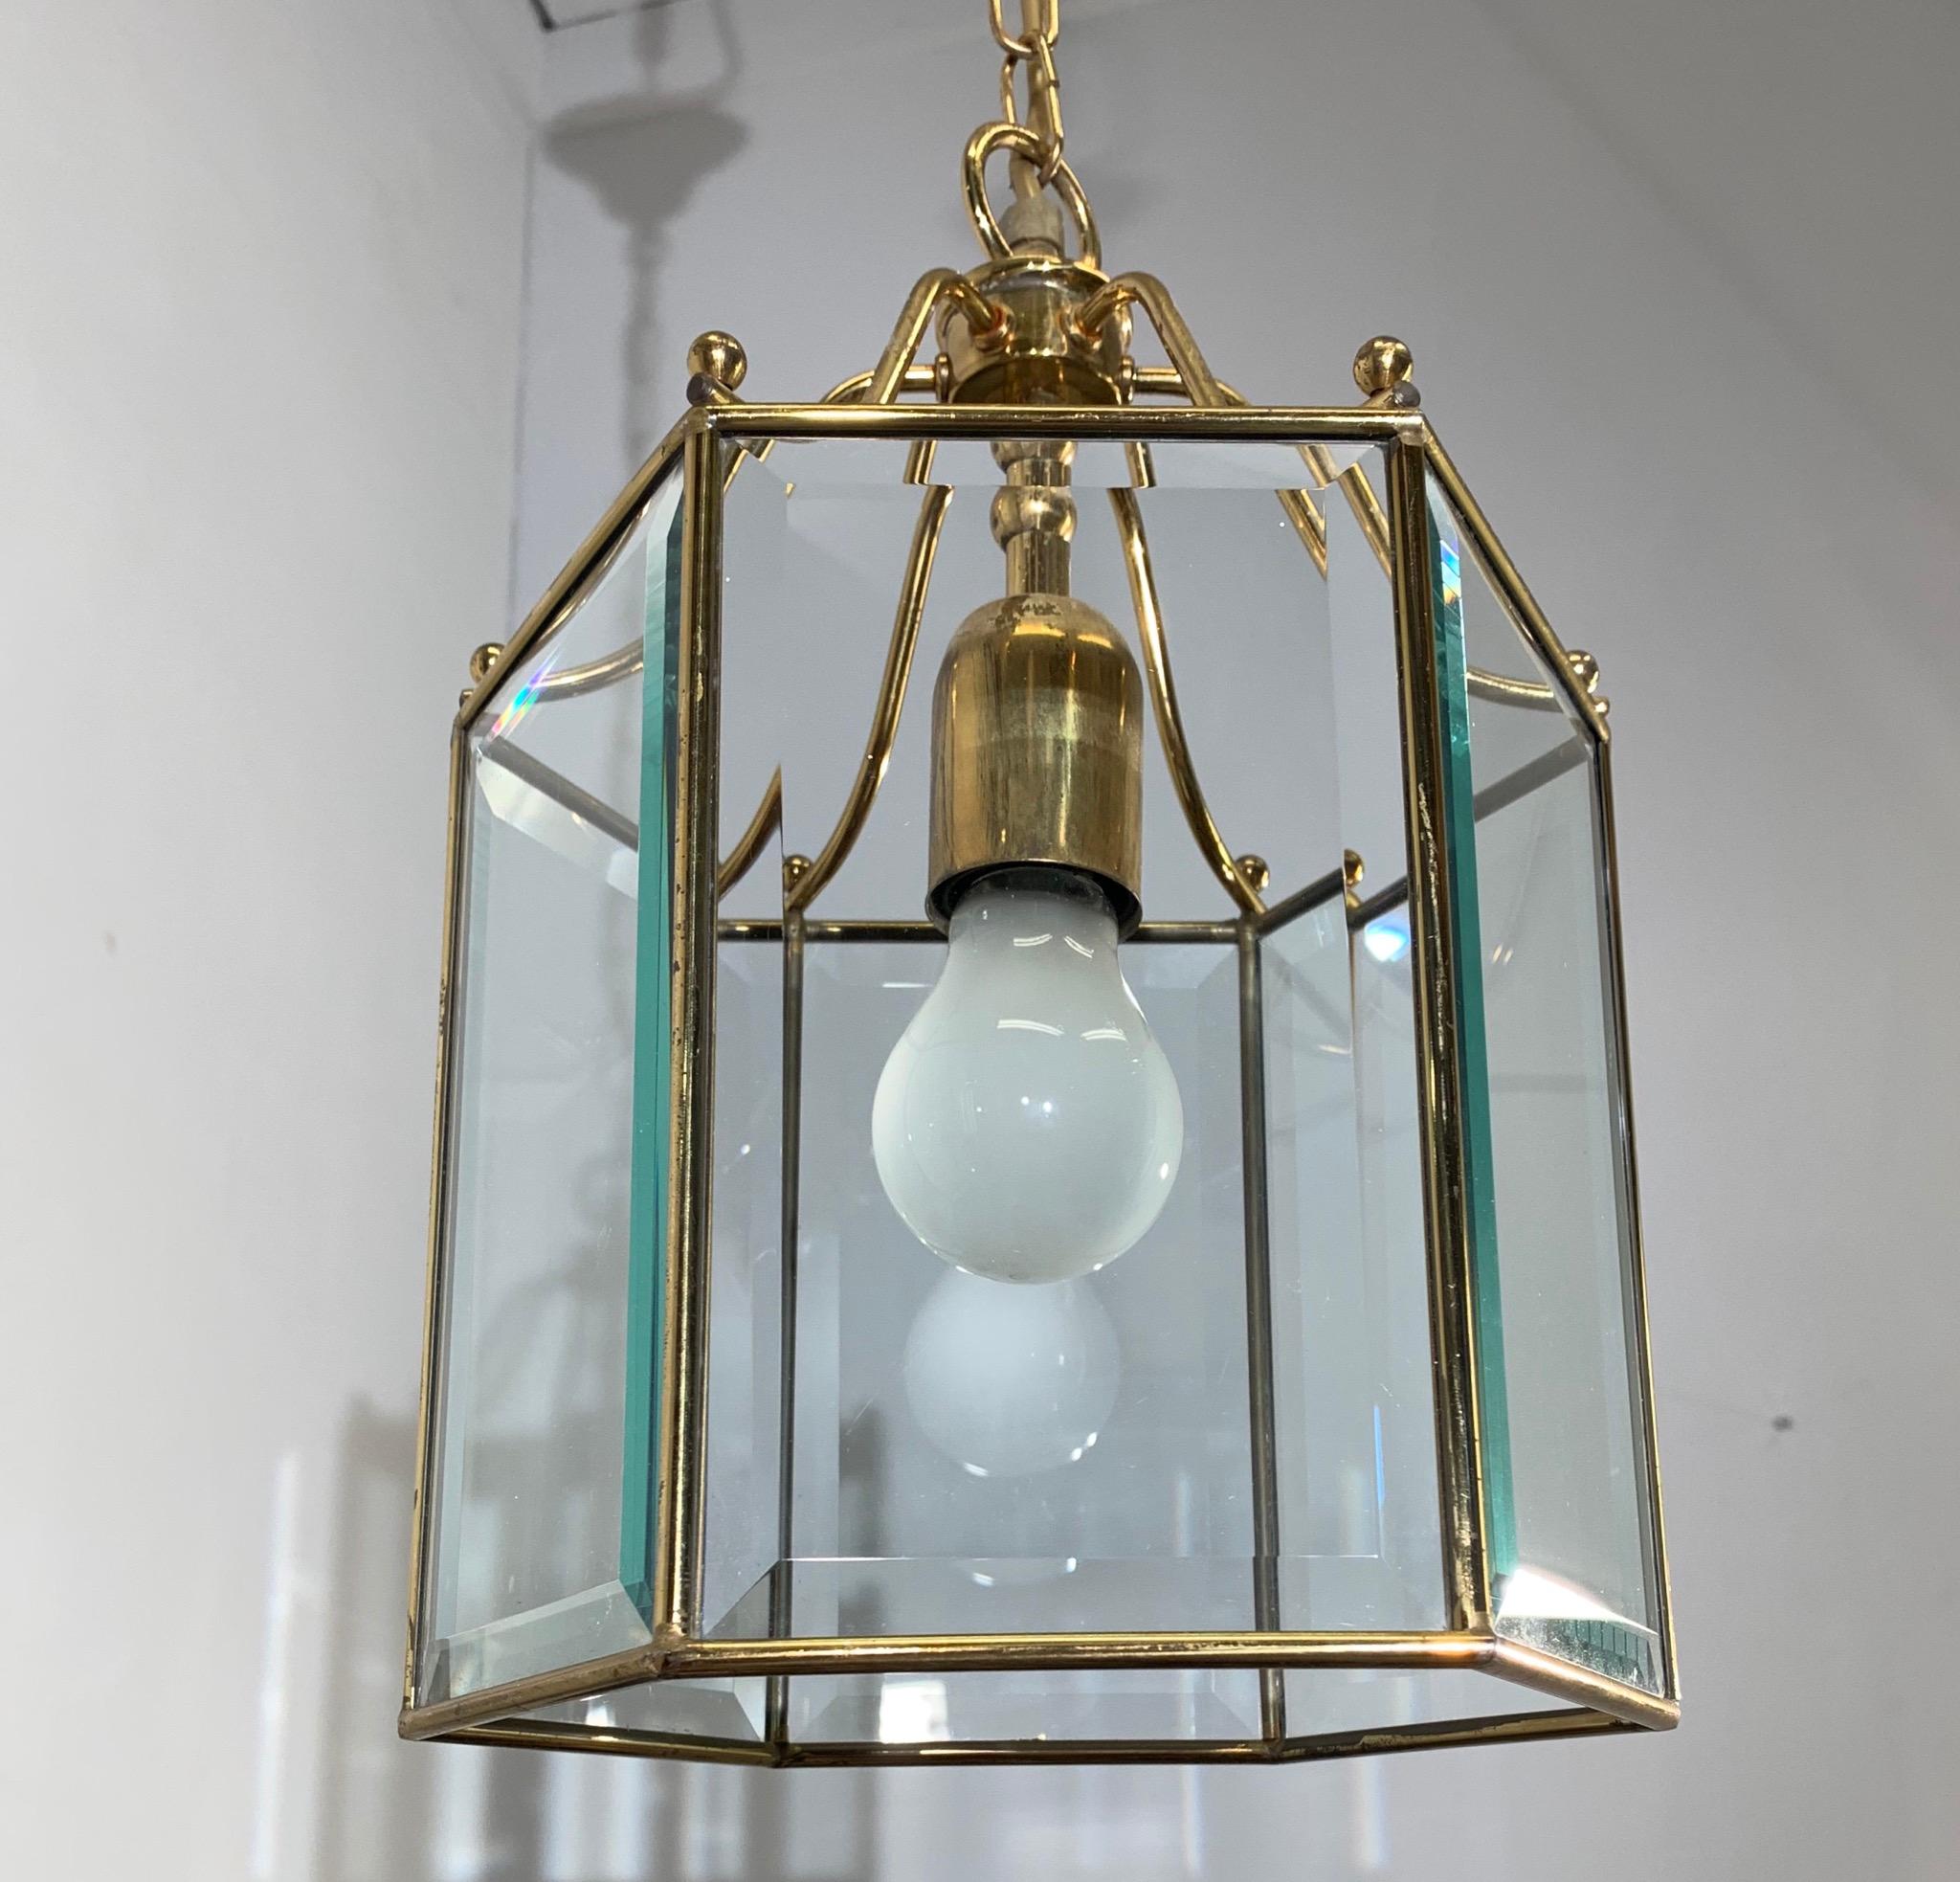 Good size, great shape and finest quality 1980s, Georgian style pendant light.

We all know that lighting is very important as the finishing touch to your home or work space. Both the design and the light that a fixture radiates are important